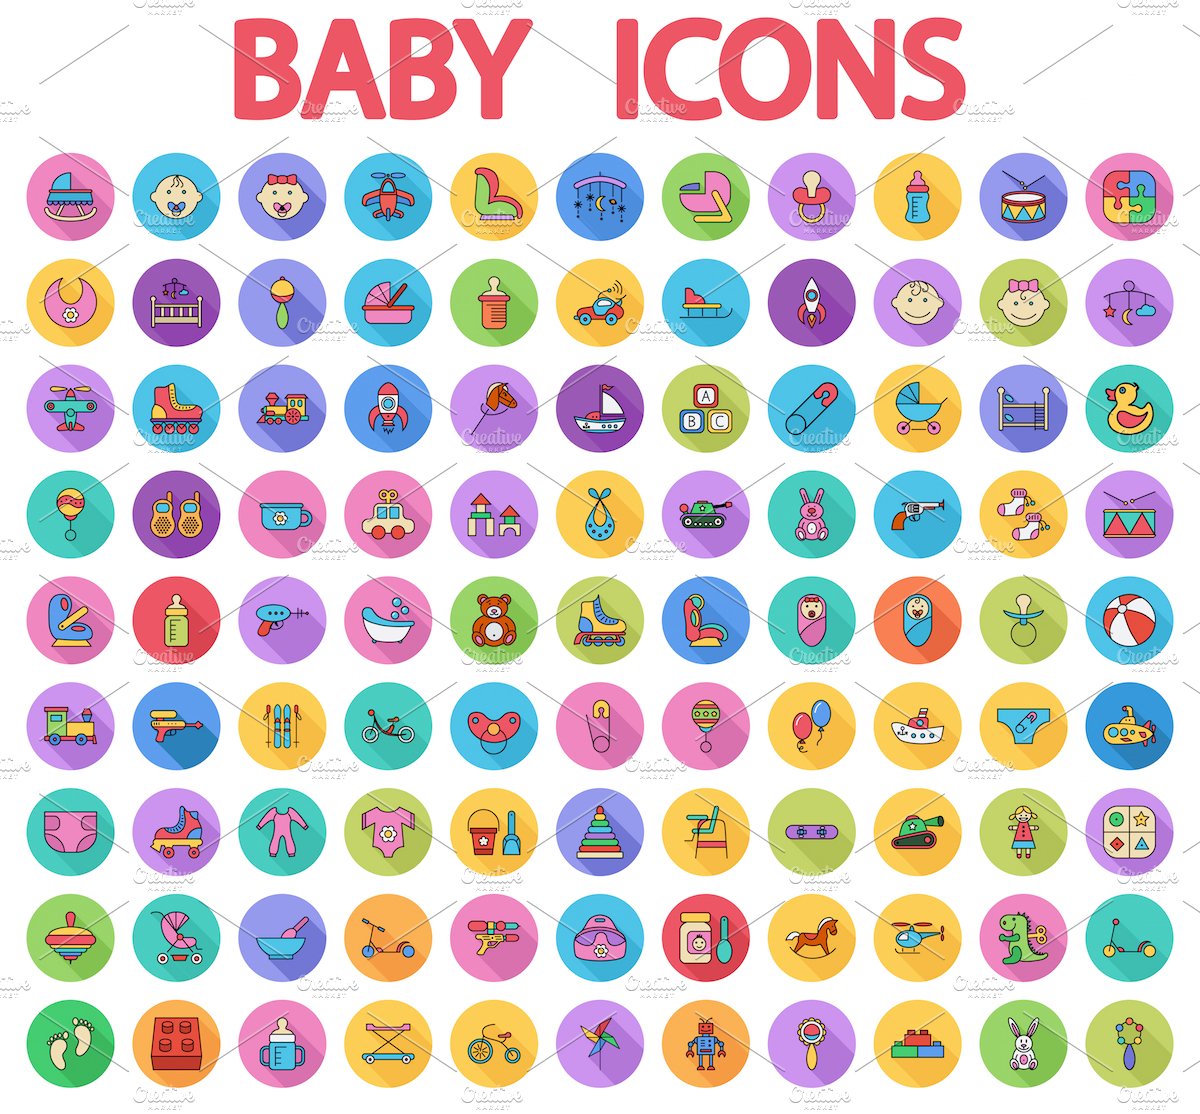 Baby icons set. cover image.